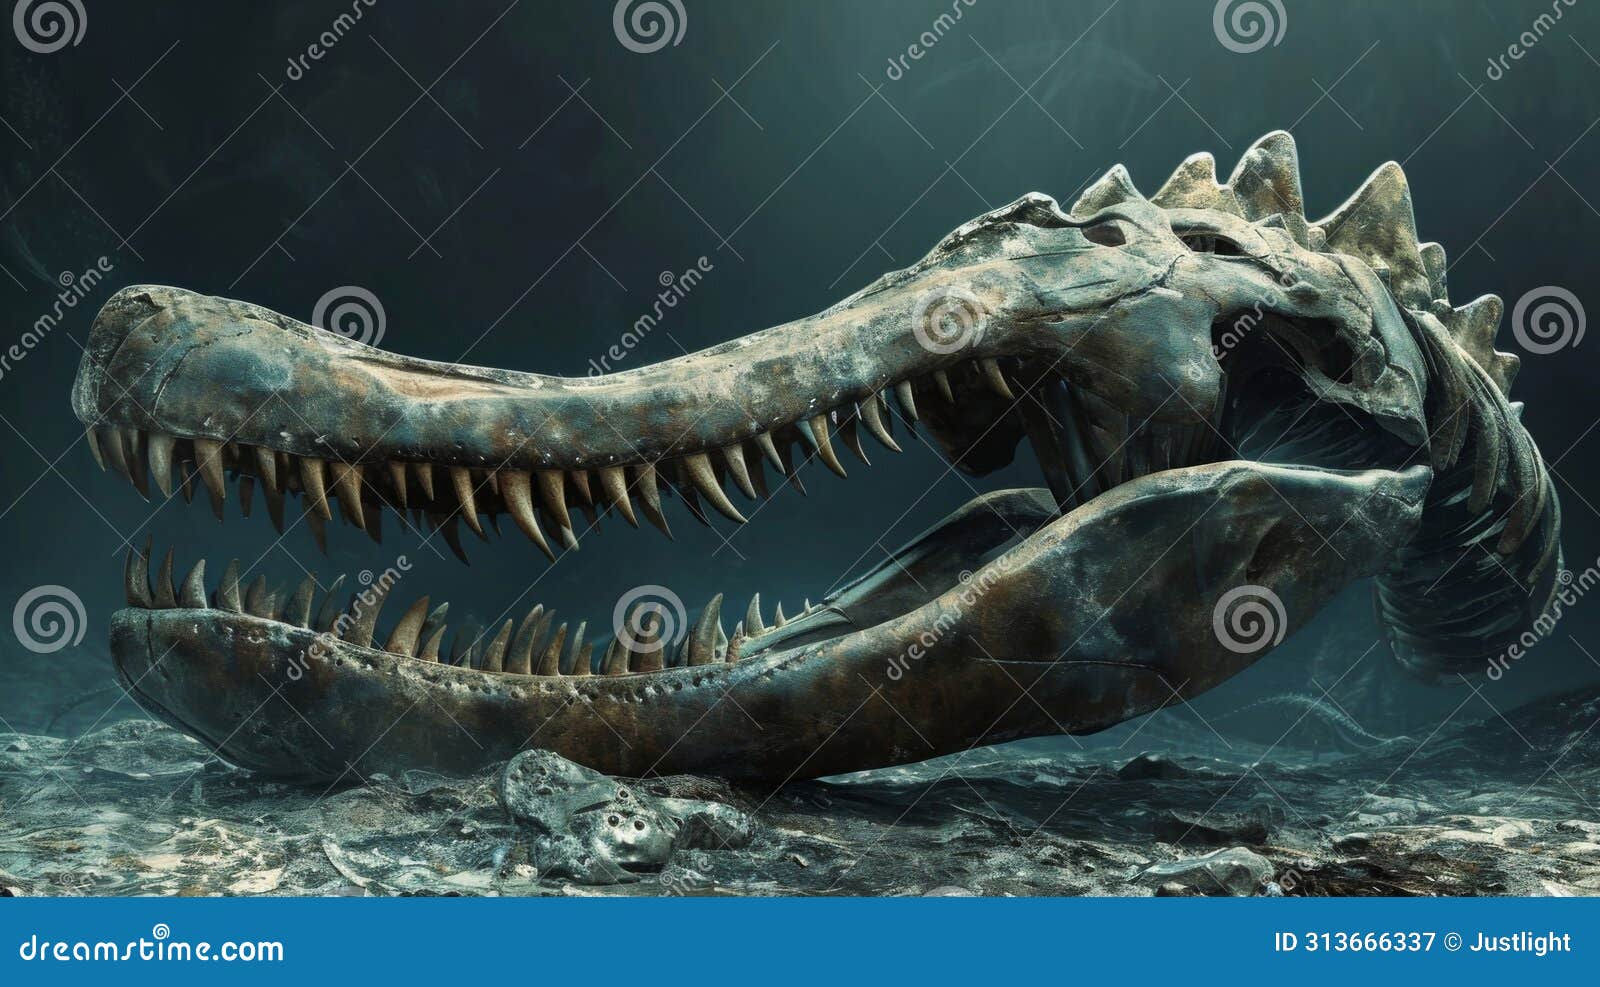 the powerful jawbone of a mosasaurus rests a the bones offering a glimpse into the terrifying prehistoric predator